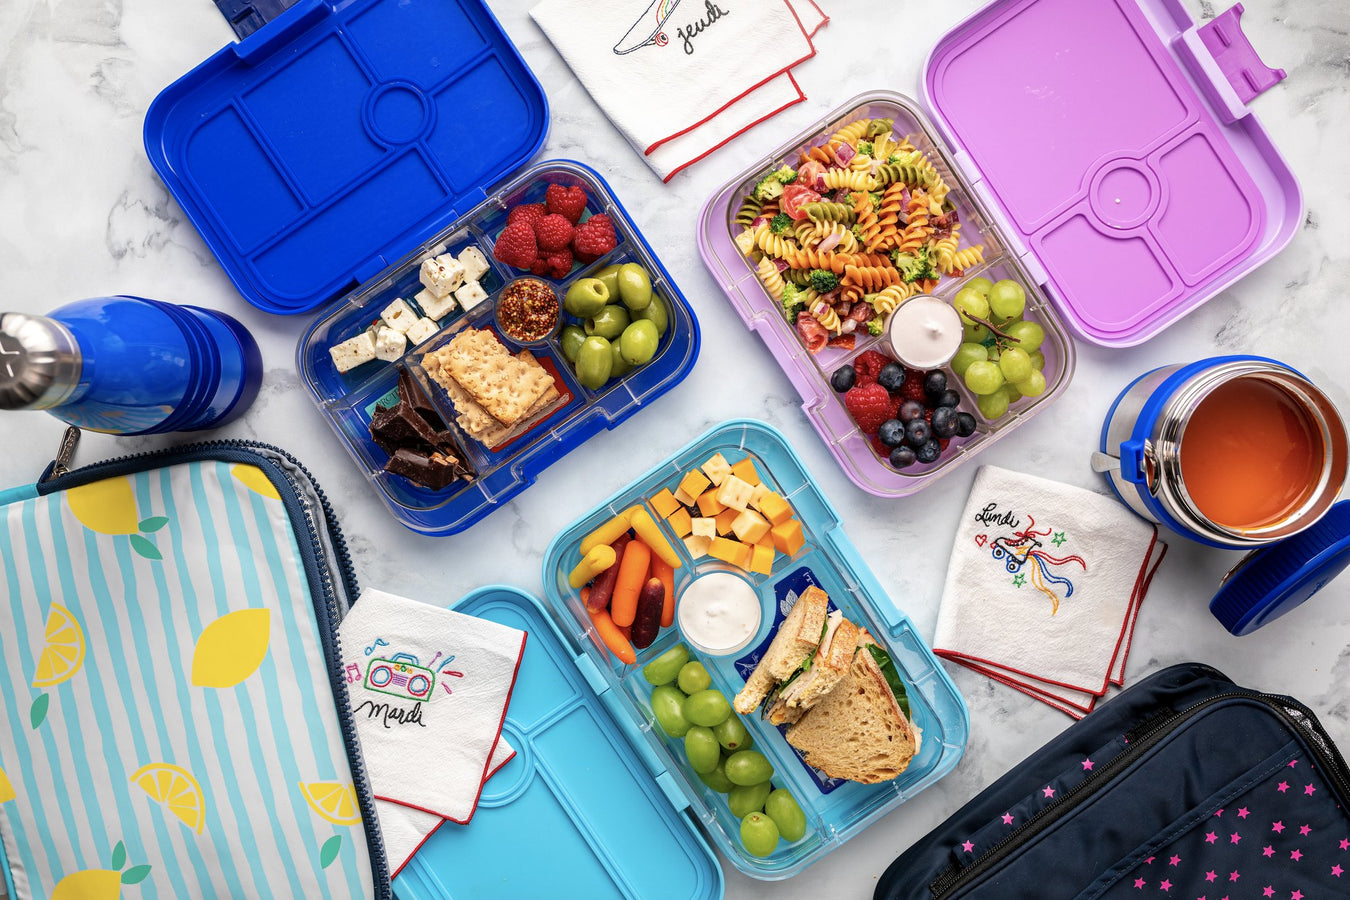 Healthy lunches packed in Yumbox lunch kits